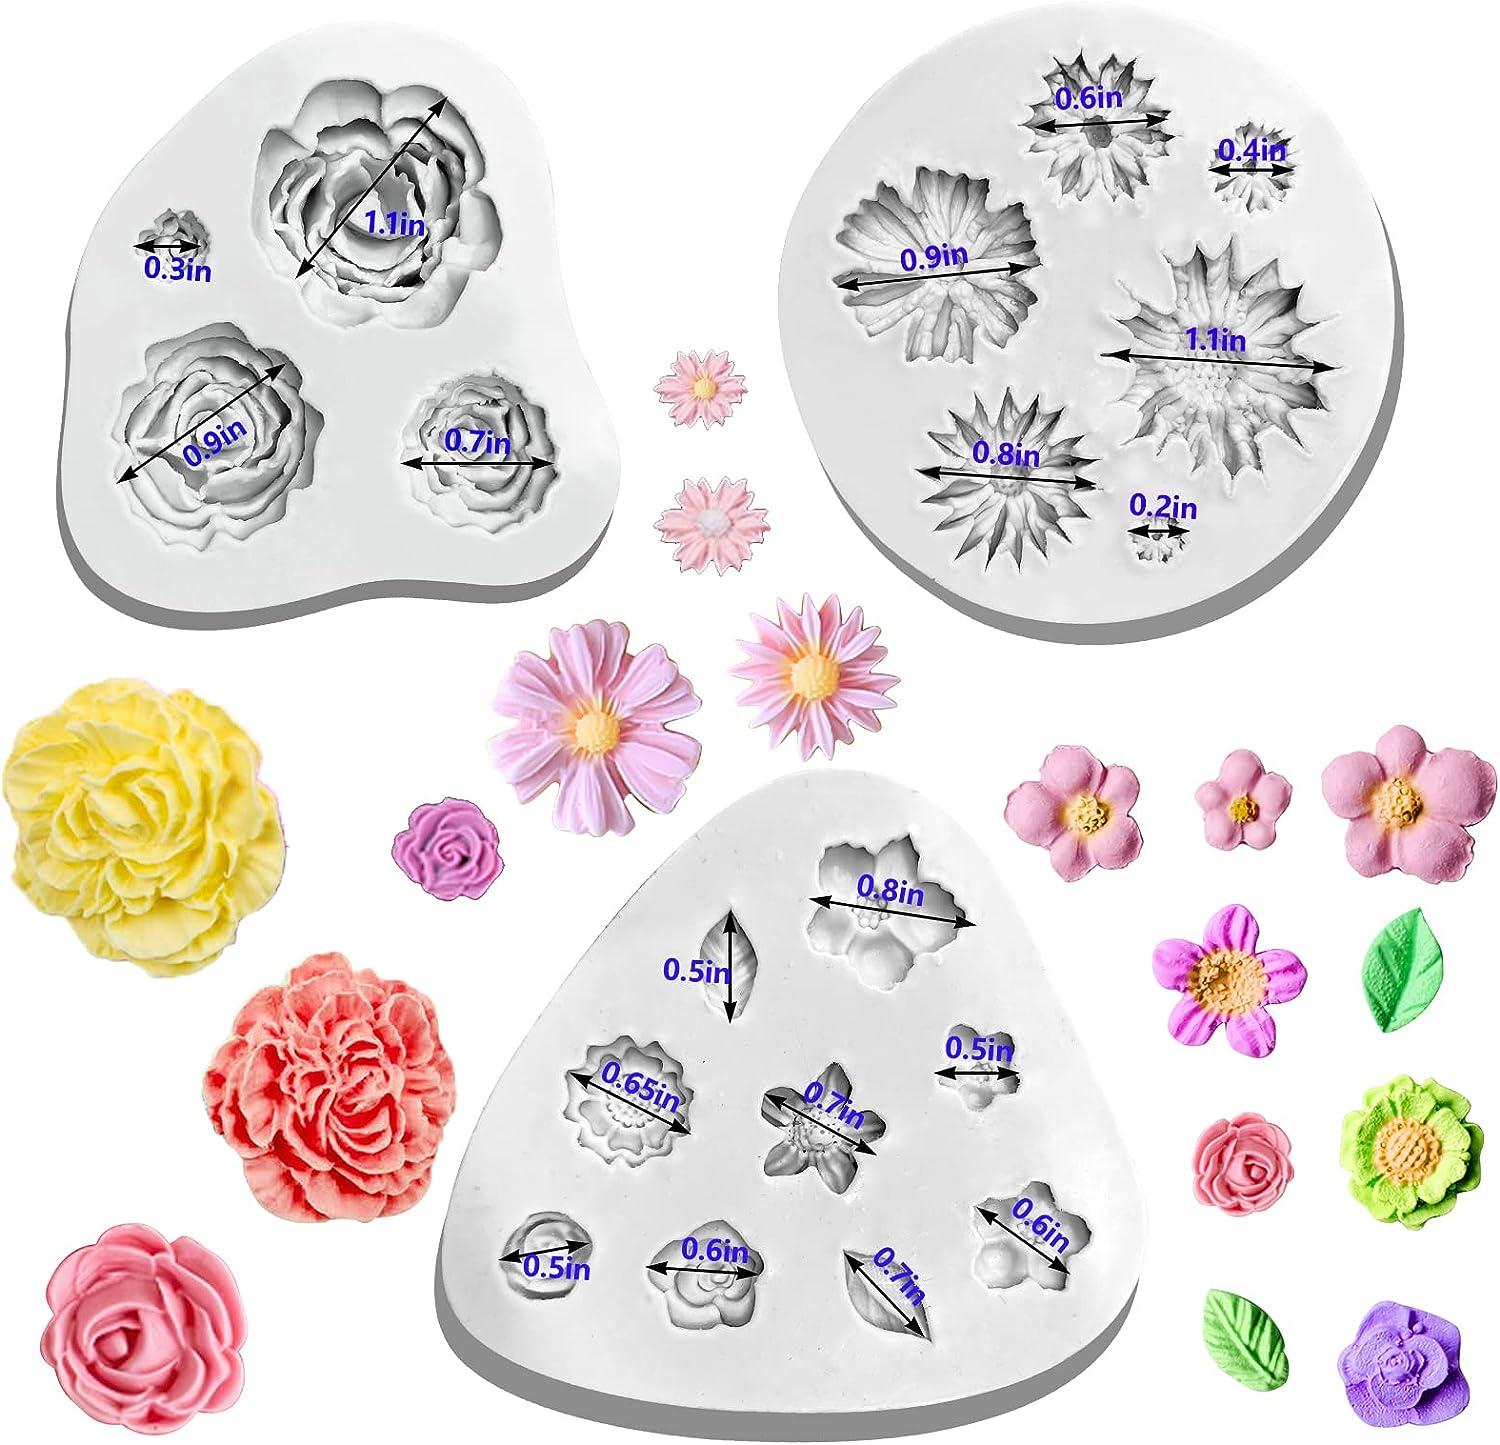 OIIKI 3PCS 3D Flower Resin Silicone Molds, Daisy Sunflower Flower Resin  Casting Molds, DIY Resin Pendant Molds for Jewelry Making Necklace,  Earrings